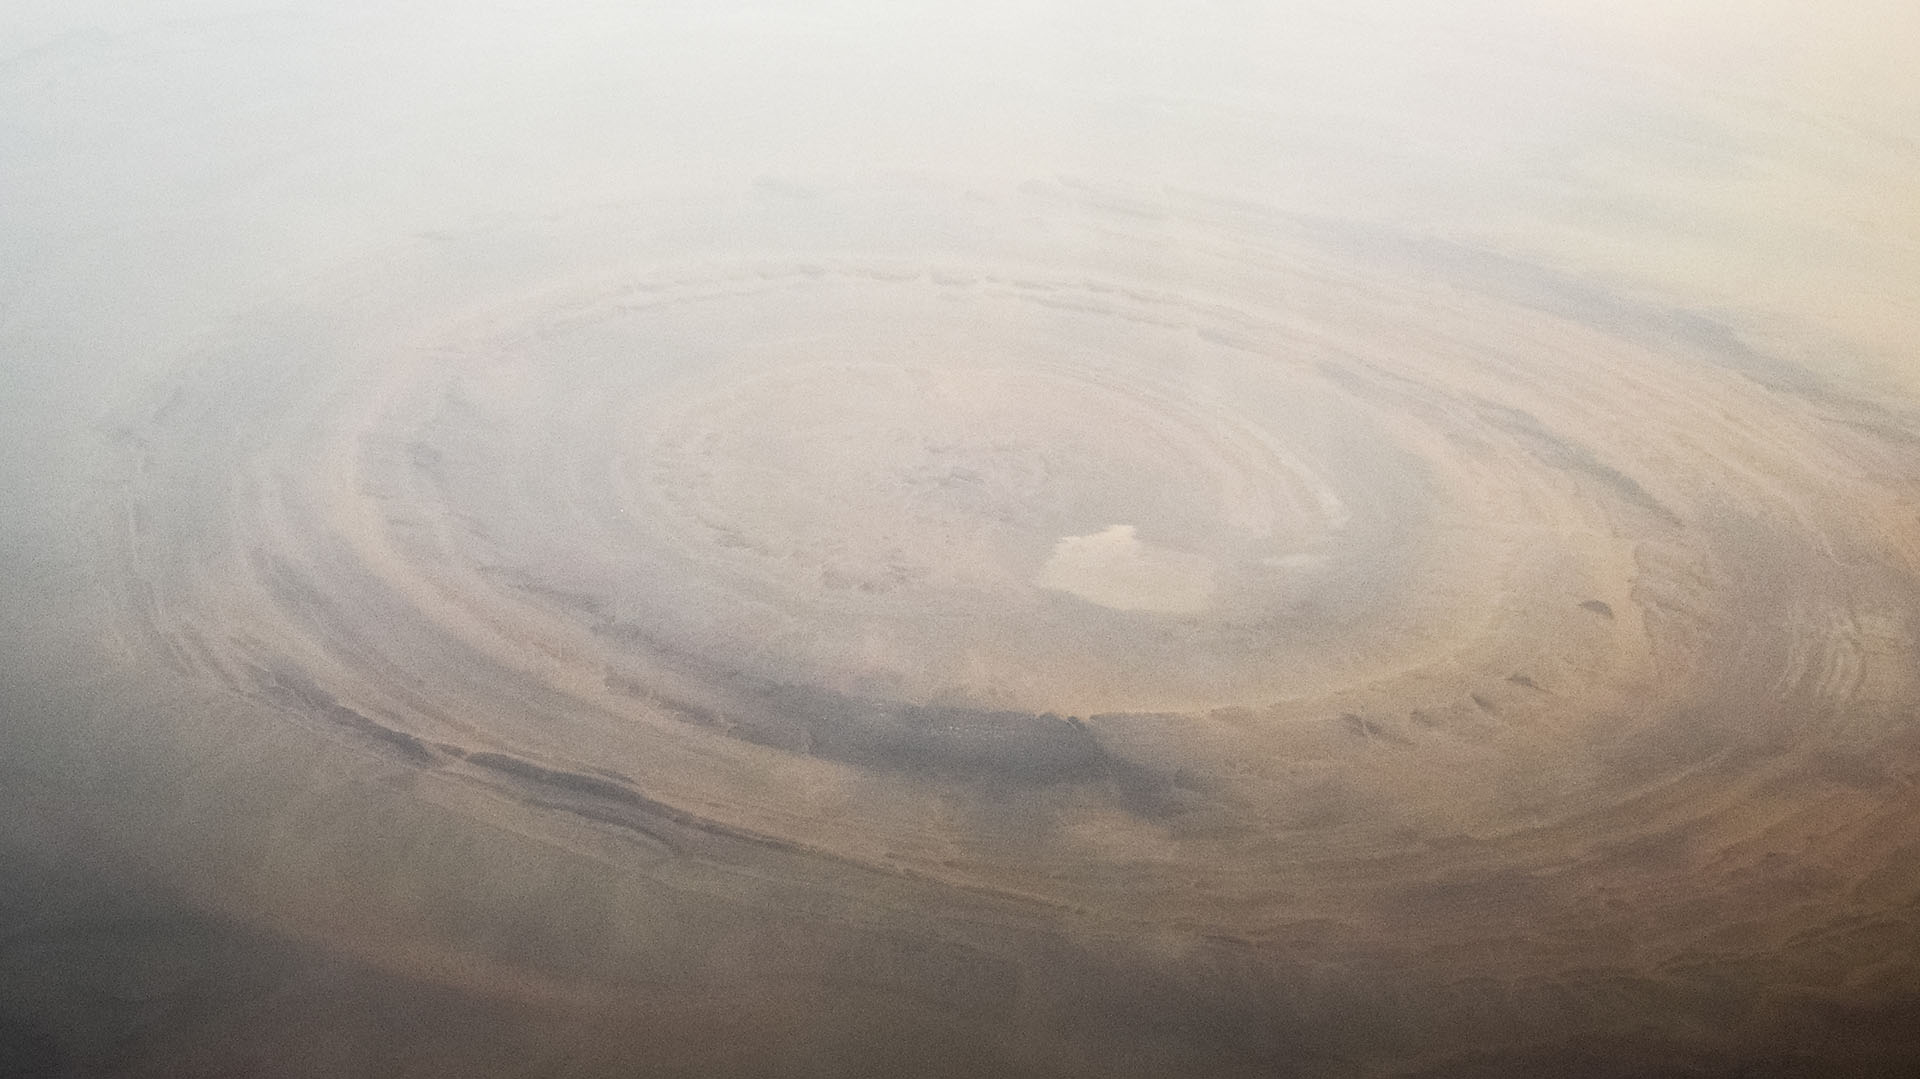 Sahara Desert, Mauritania: Aerial view of the Richât structure, also known as Guelb er Richât, "Eye of Africa" or "Eye of the desert" It is a severely eroded elliptical geological dome 40 kilometers (25 miles) in diameter in the Adrar Plateau in the Sahara, near Oueddan, west-central Mauritania.